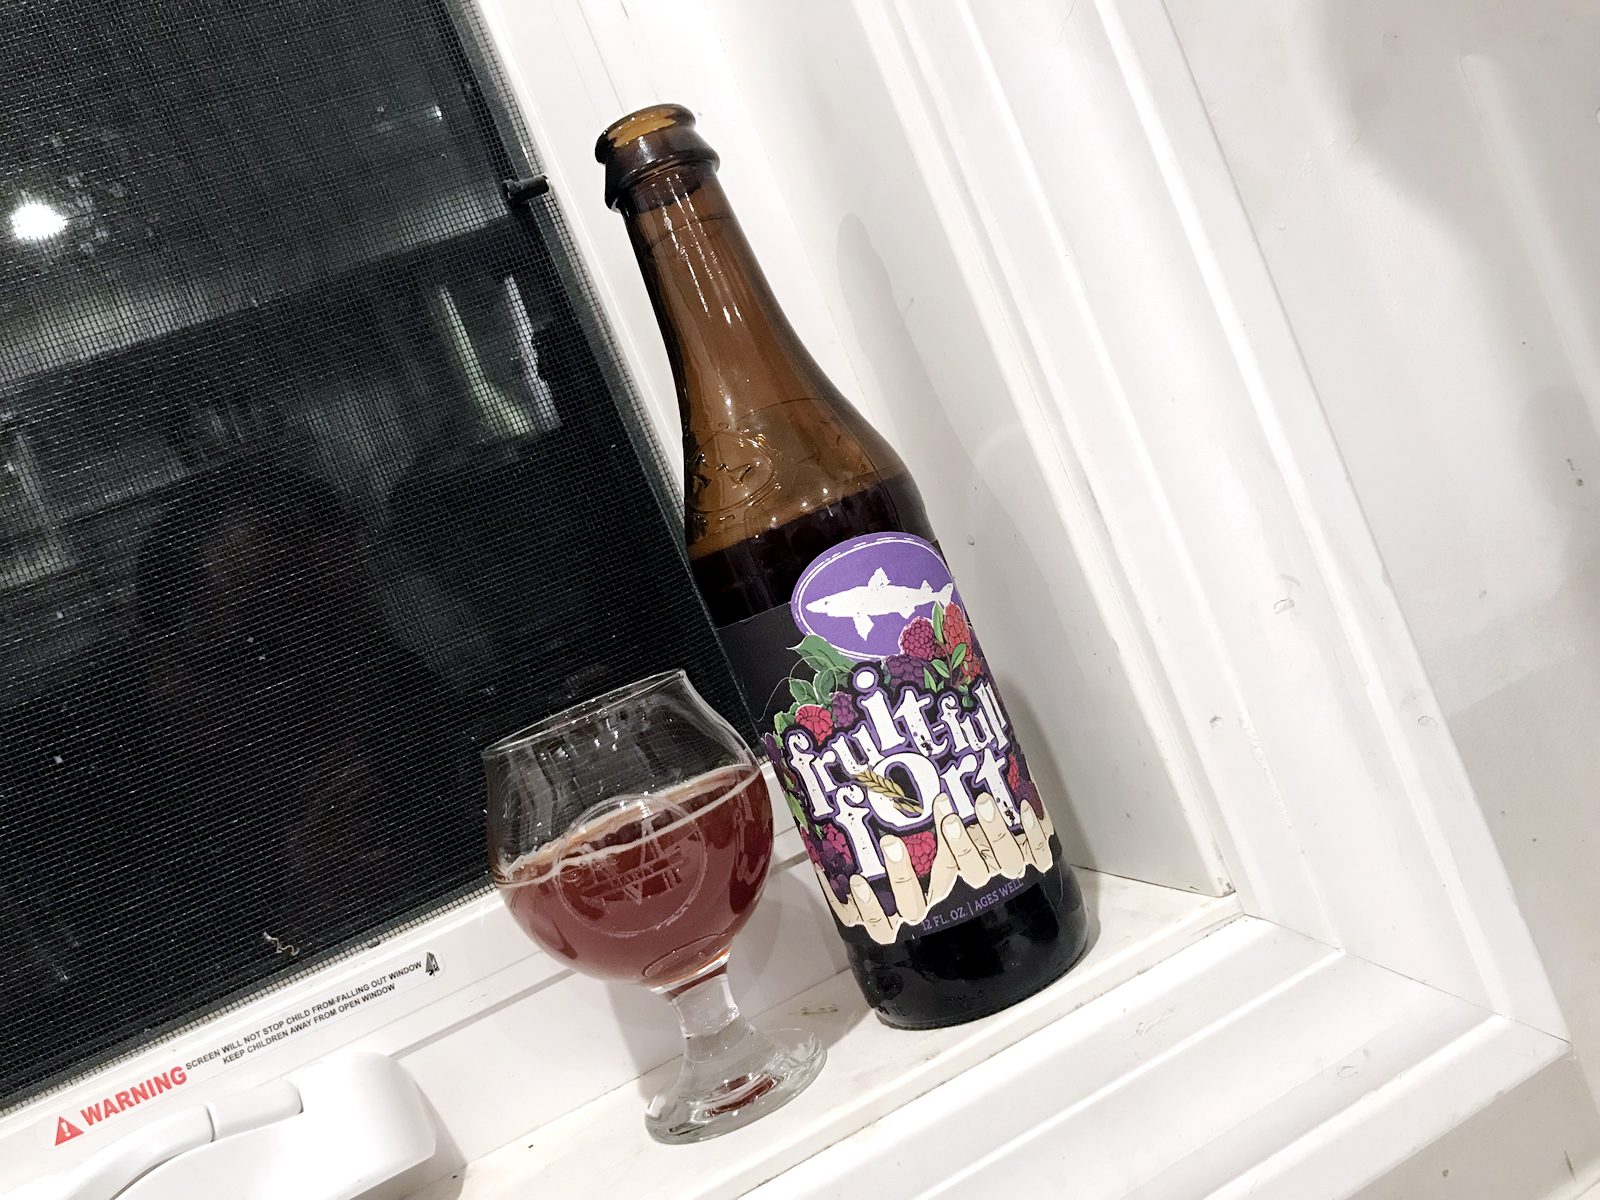 Dogfish Head Craft Brewery: Fruit-Full Fort